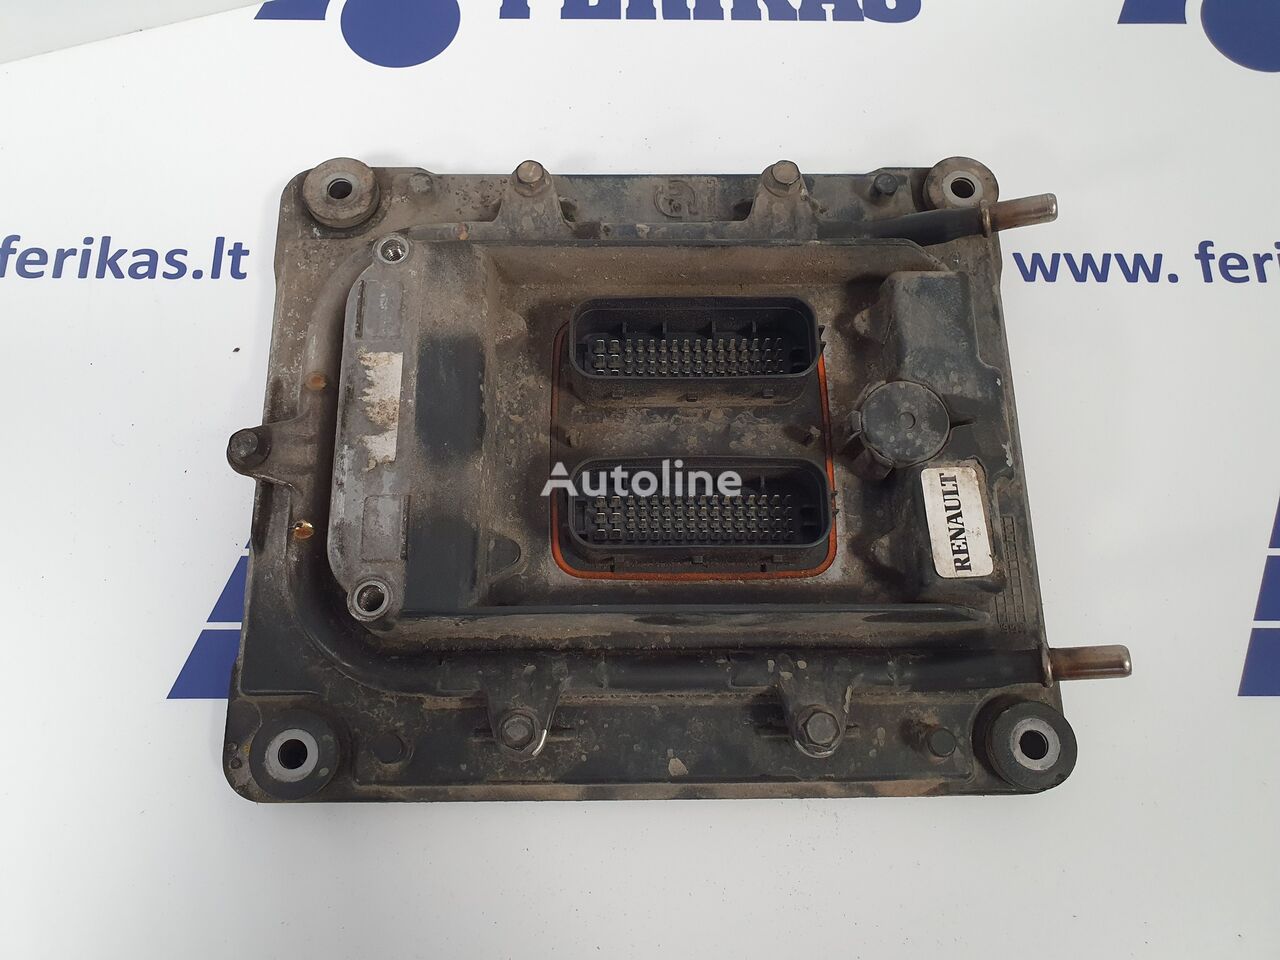 Renault T EURO 6 engine control unit ECU 21900541 - P02 for Renault T truck tractor